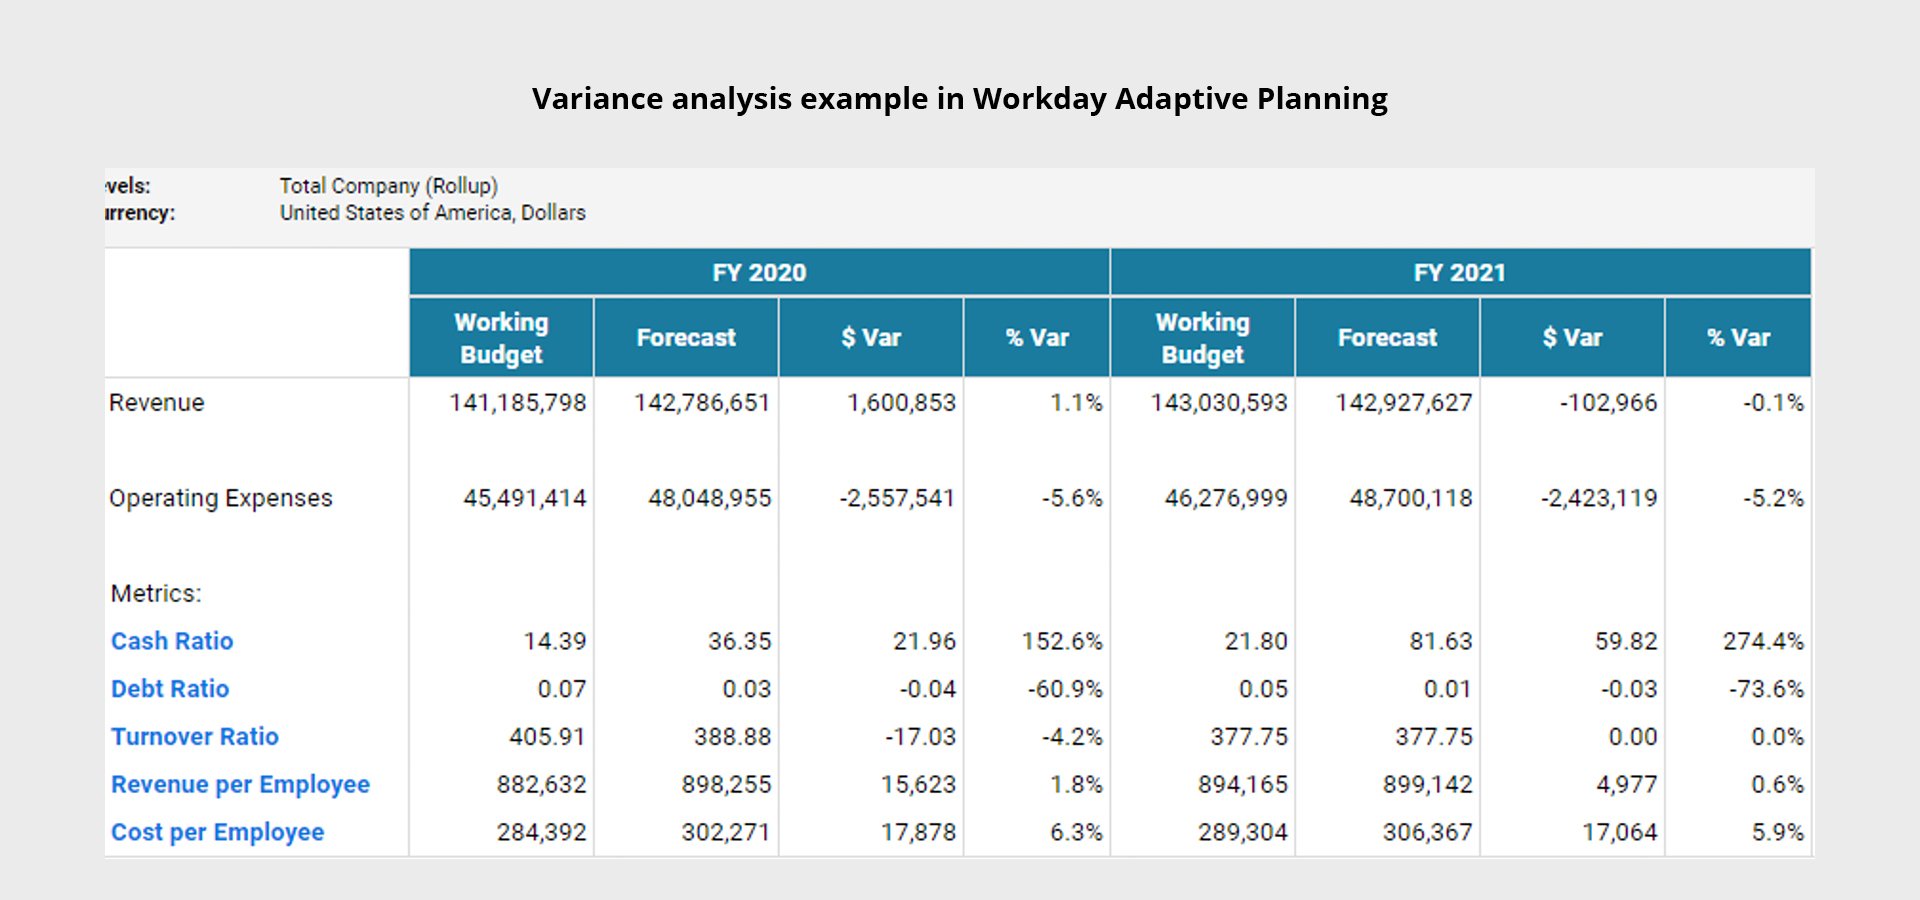 A variance analysis example in Workday Adaptive Planning